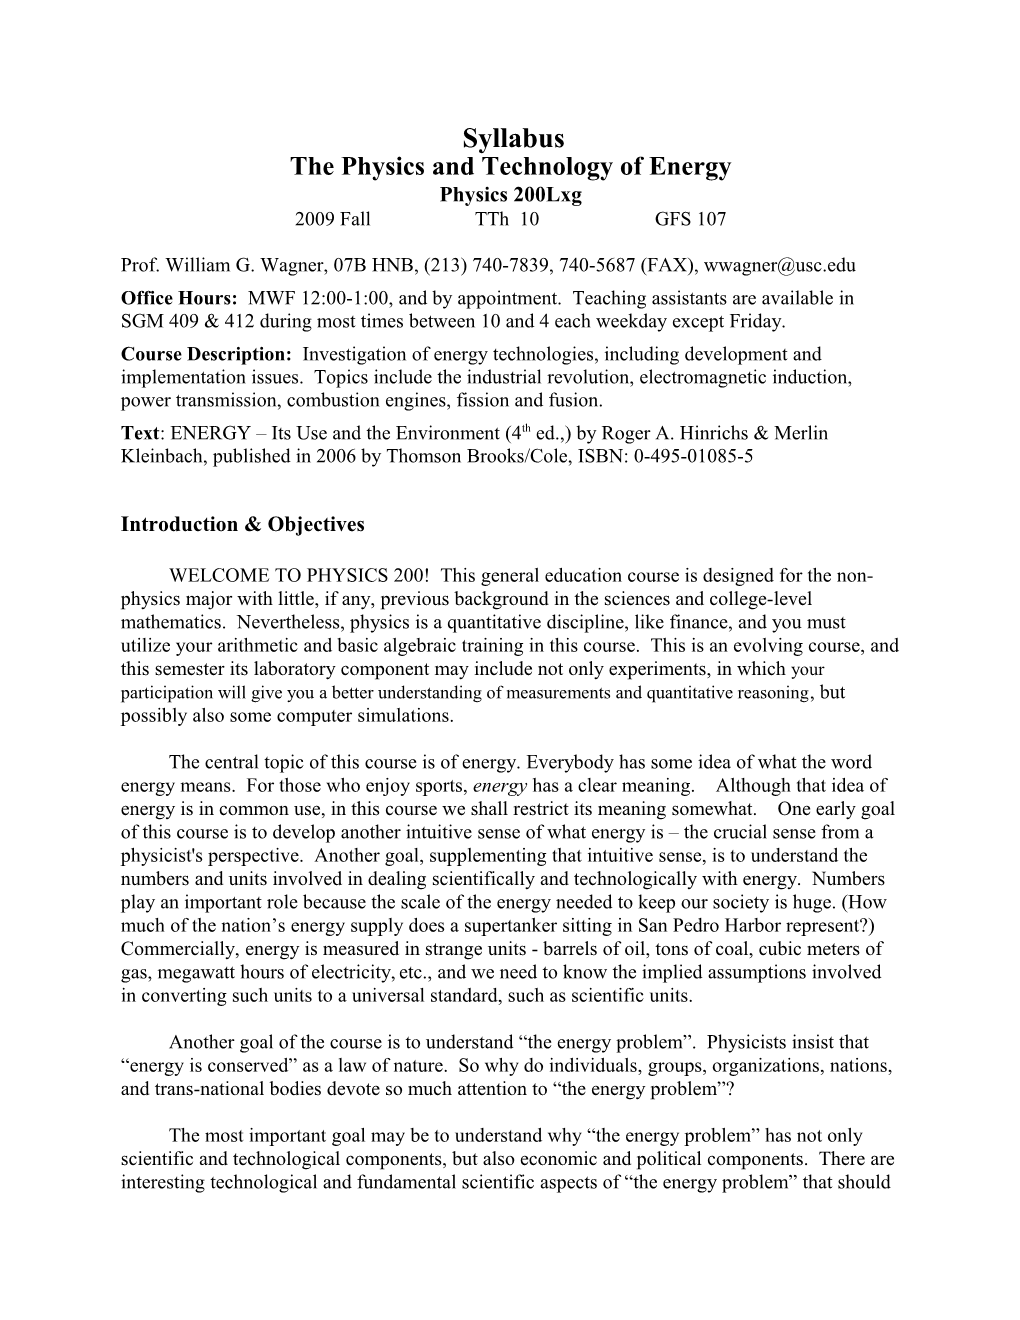 The Physics and Technology of Energy